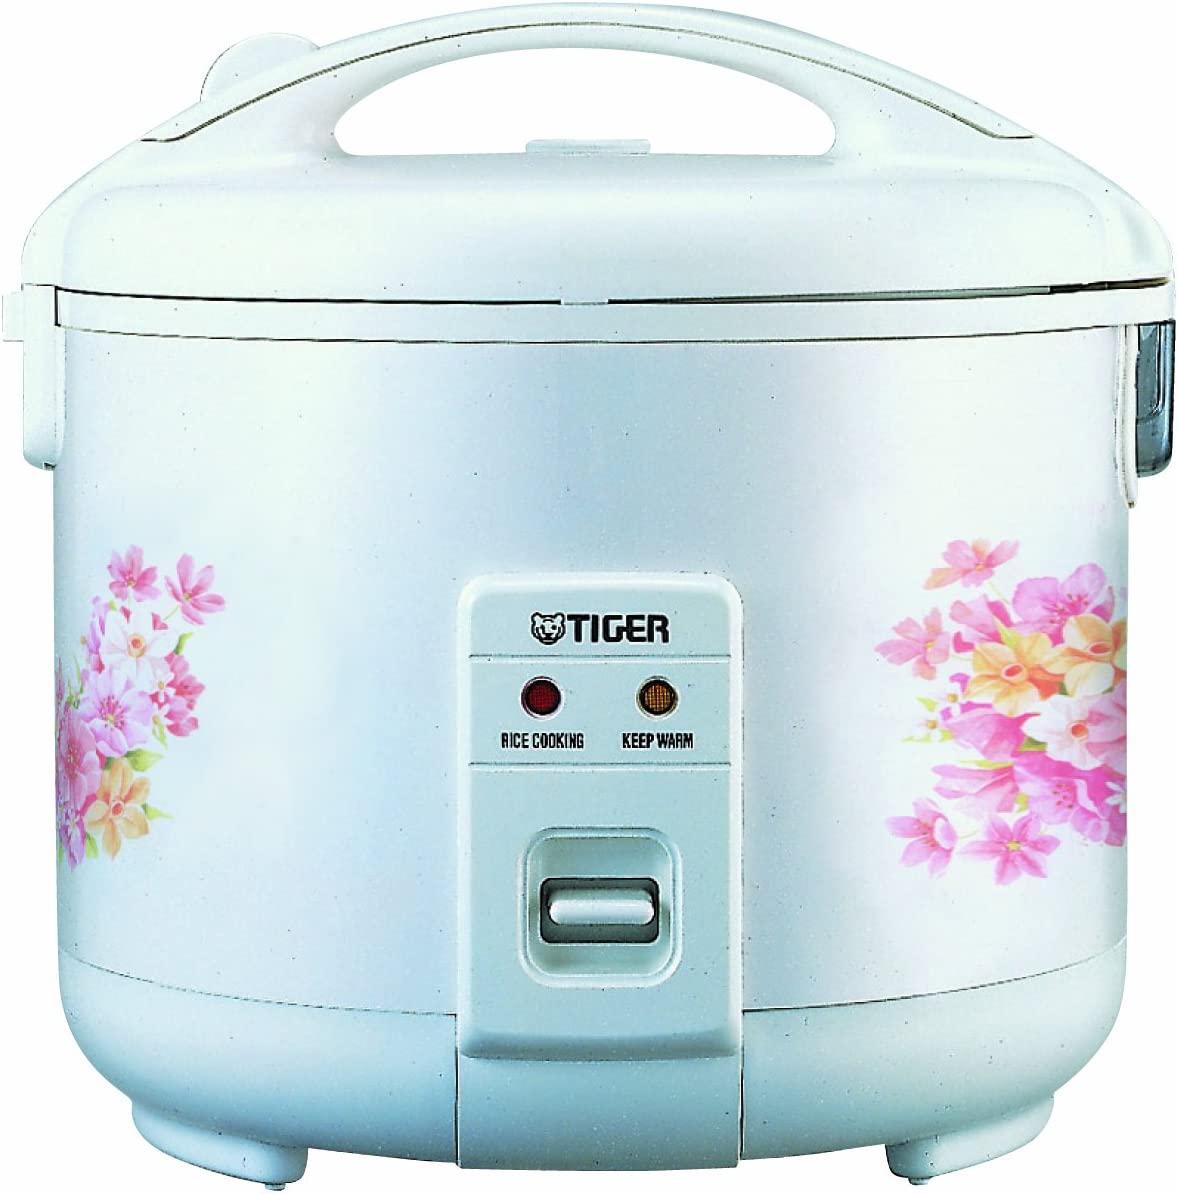 Tiger Rice Cooker and Warmer, 5.5-Cup (Uncooked)